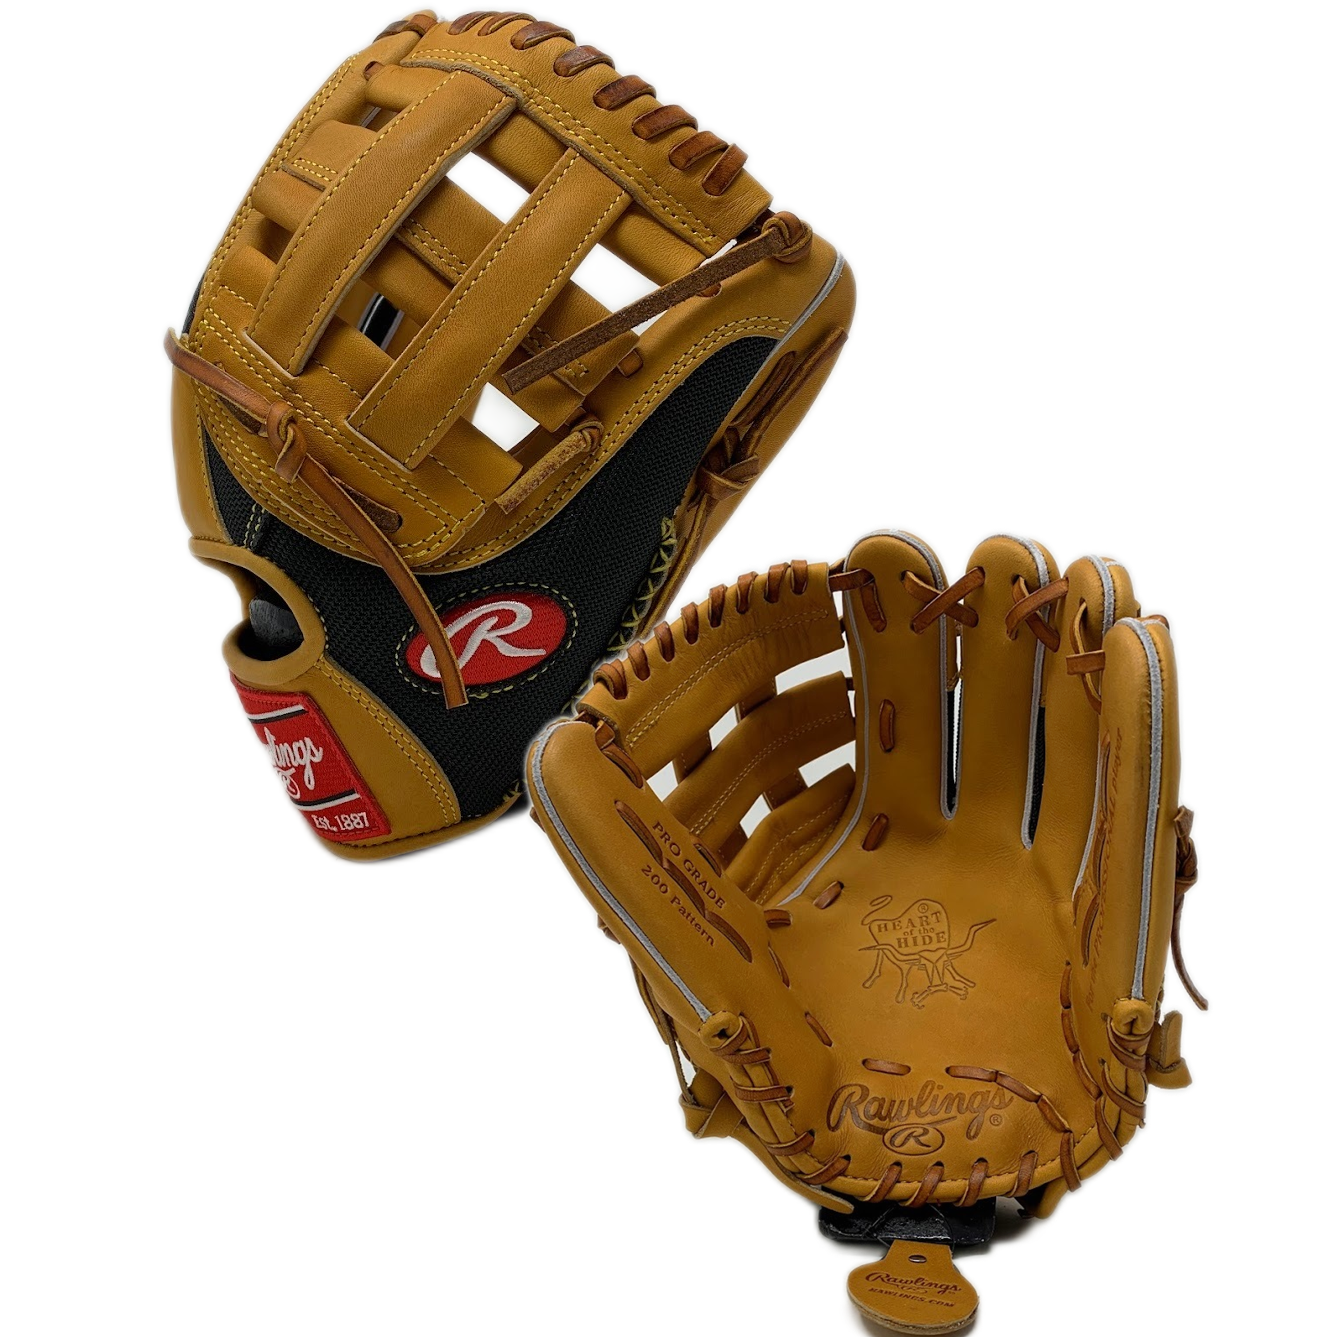 rawlings-heart-of-the-hide-11-5-inch-baseball-glove-200-deco-mesh-pro-h-web-right-hand-throw PRO204-6TDM-RightHandThrow Rawlings  <p><span style=font-size large;>Max 2 Per Customer</span></p> <p><span style=font-size large;>Constructed from Rawlings